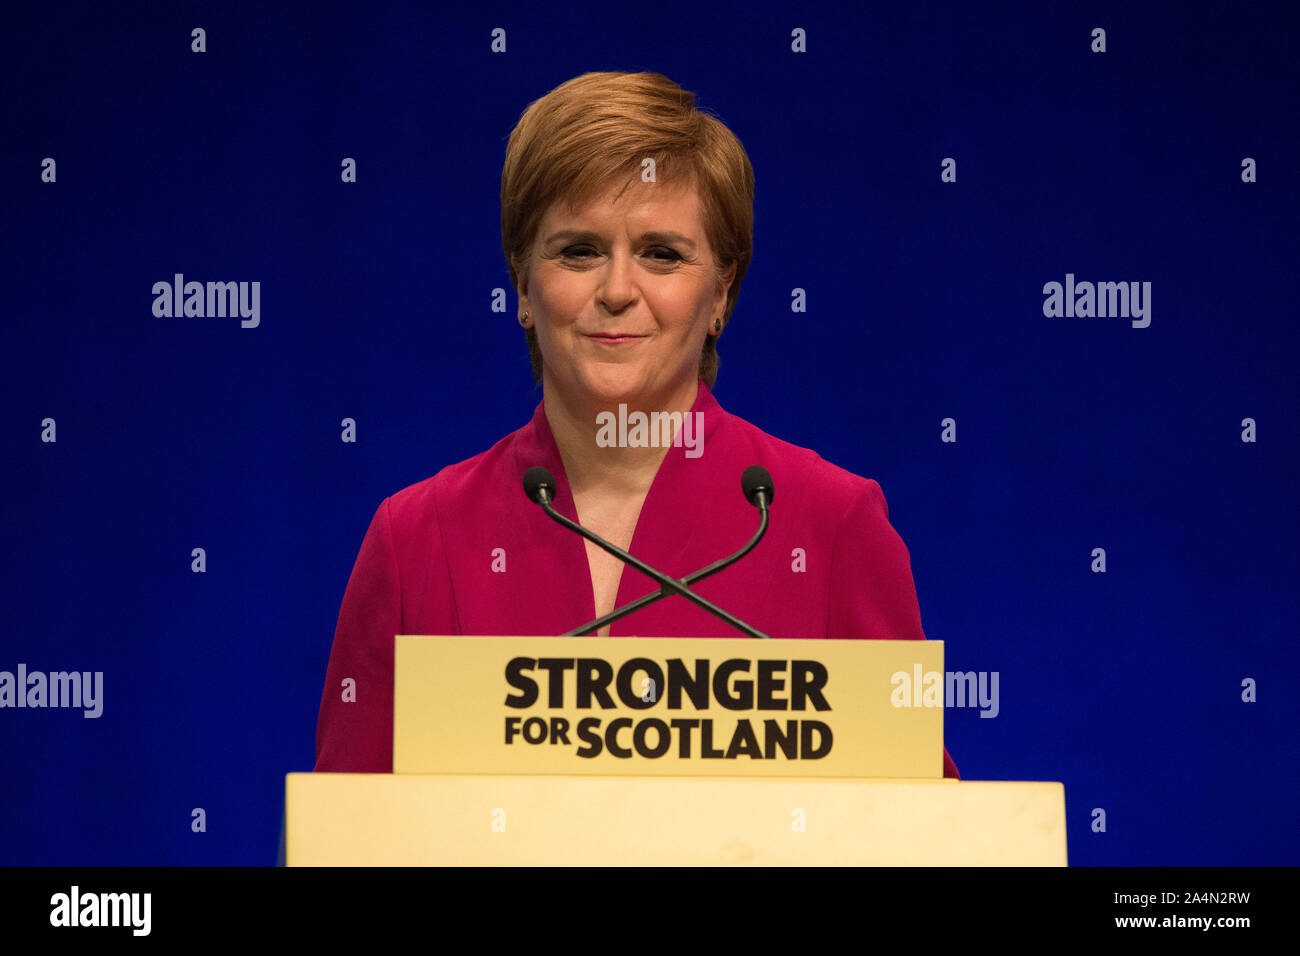 Aberdeen, UK. 15 October 2019.  Pictured: Nicola Sturgeon - First Minister of Scotland and Leader of the Scottish National Party (SNP) delivers her keynote speech on getting Scottish Independence to close the Scottish National Party Conference, Aberdeen, UK. The Event Complex Aberdeen (TECA). Credit: Colin Fisher/Alamy Live News Stock Photo